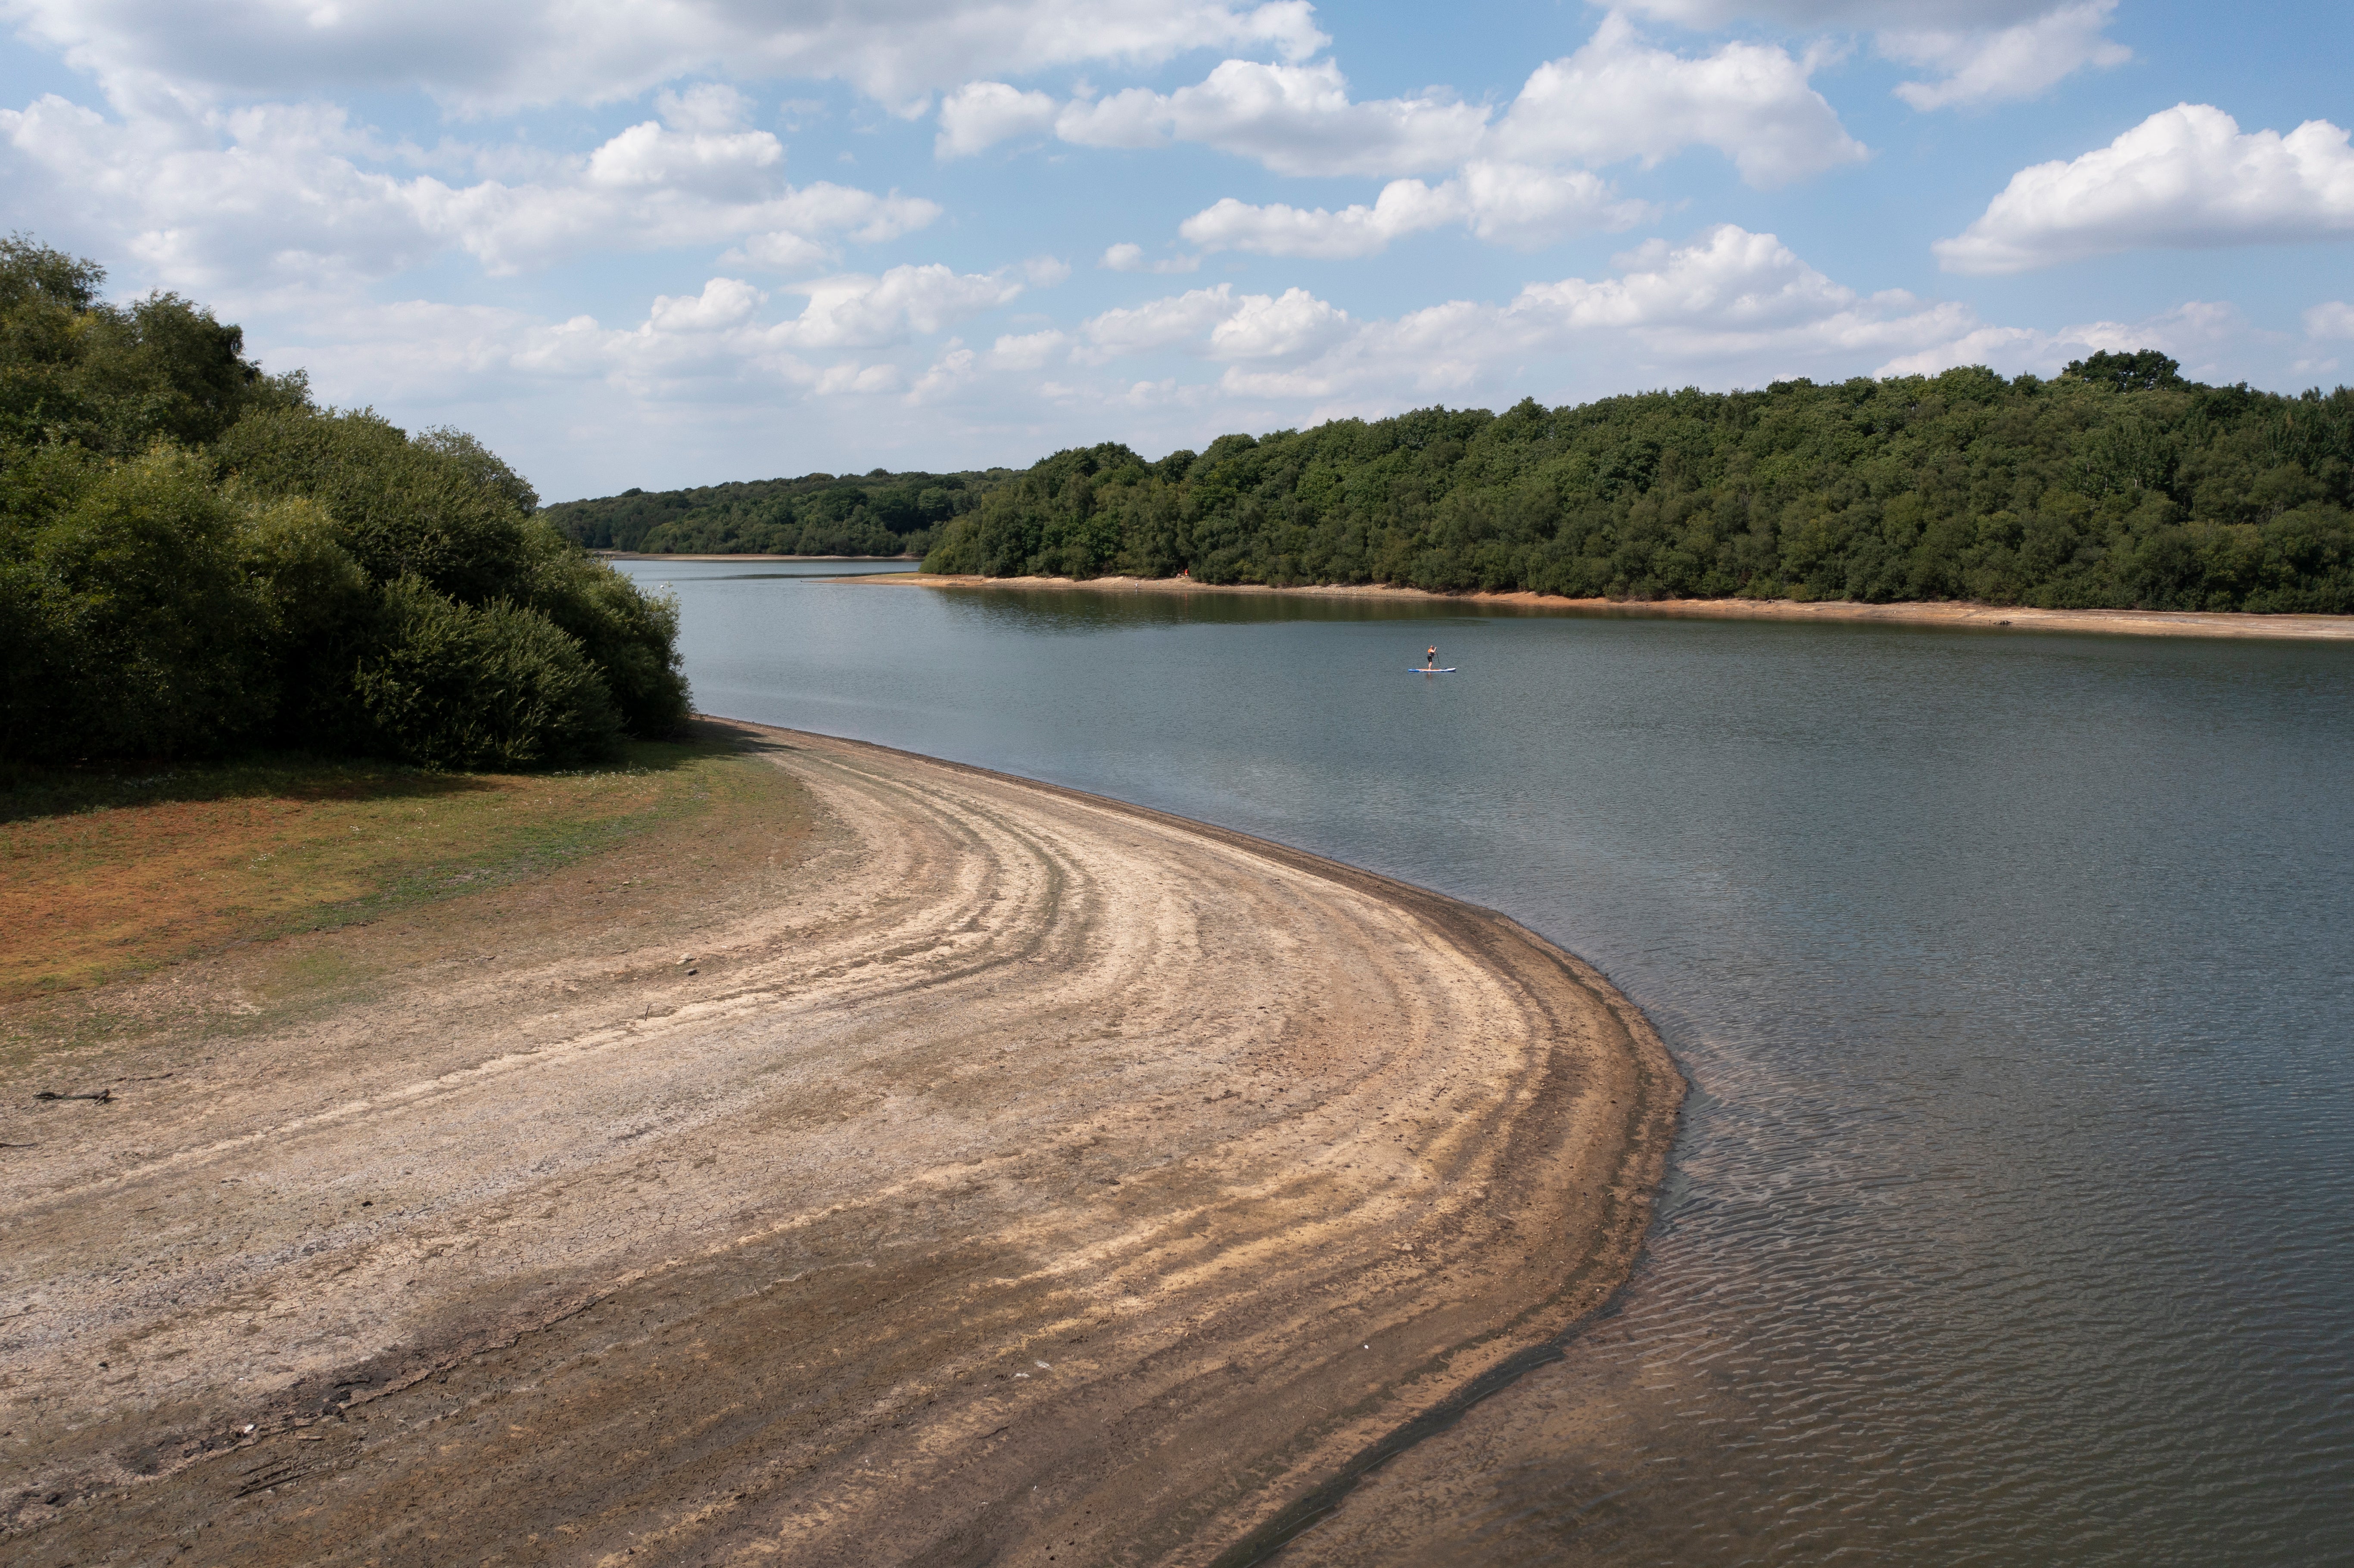 Bewl Water in Kent has seen a dramatic fall in water levels